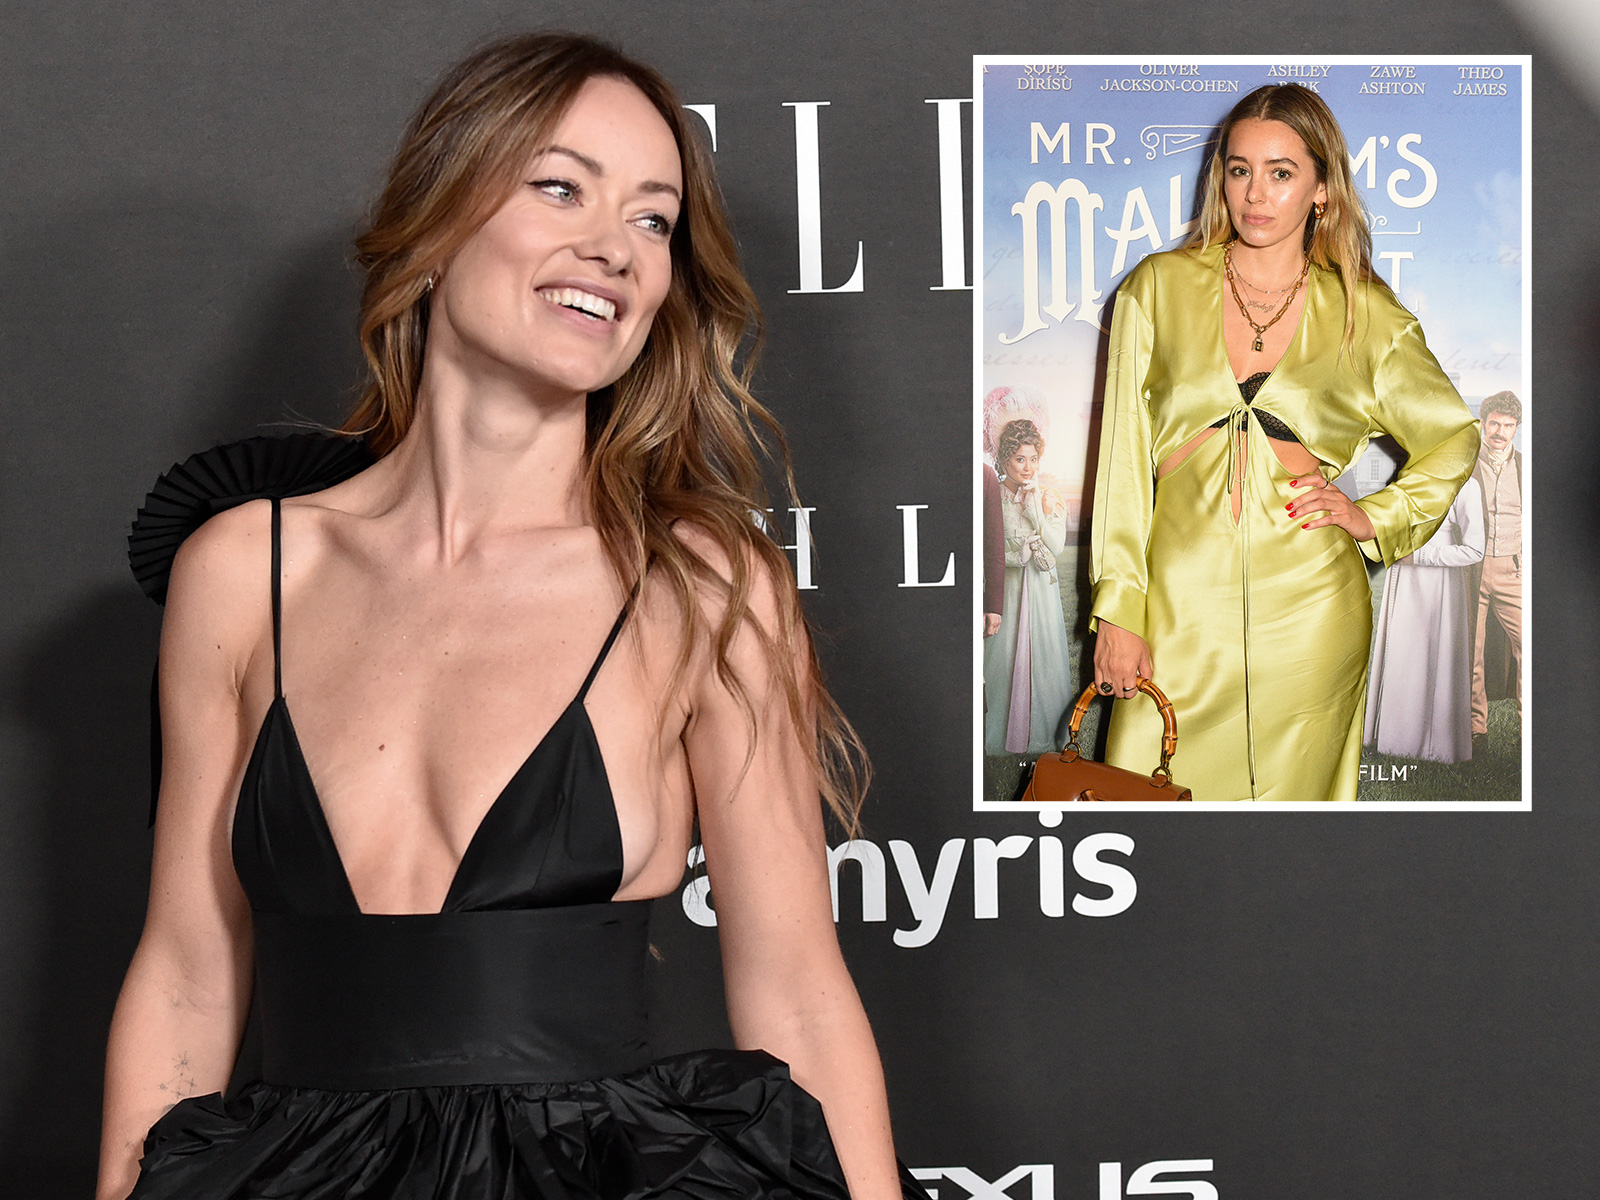 Keeley Hazells Follower Count Increases After Shading Olivia Wilde picture